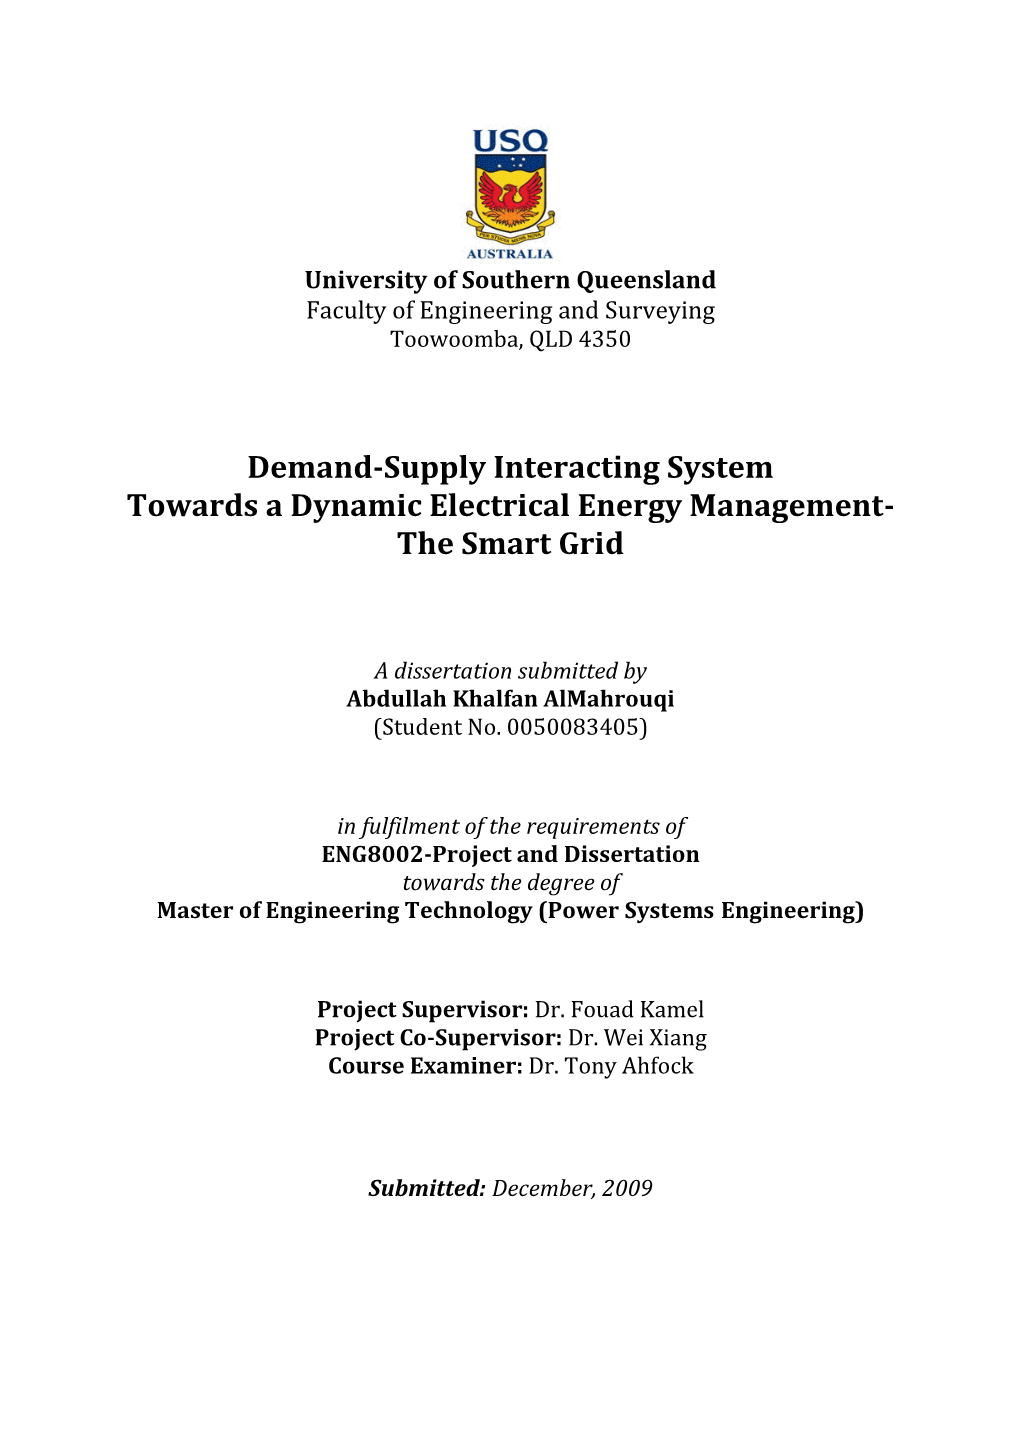 Demand-Supply Interacting System Towards a Dynamic Electrical Energy Management- the Smart Grid